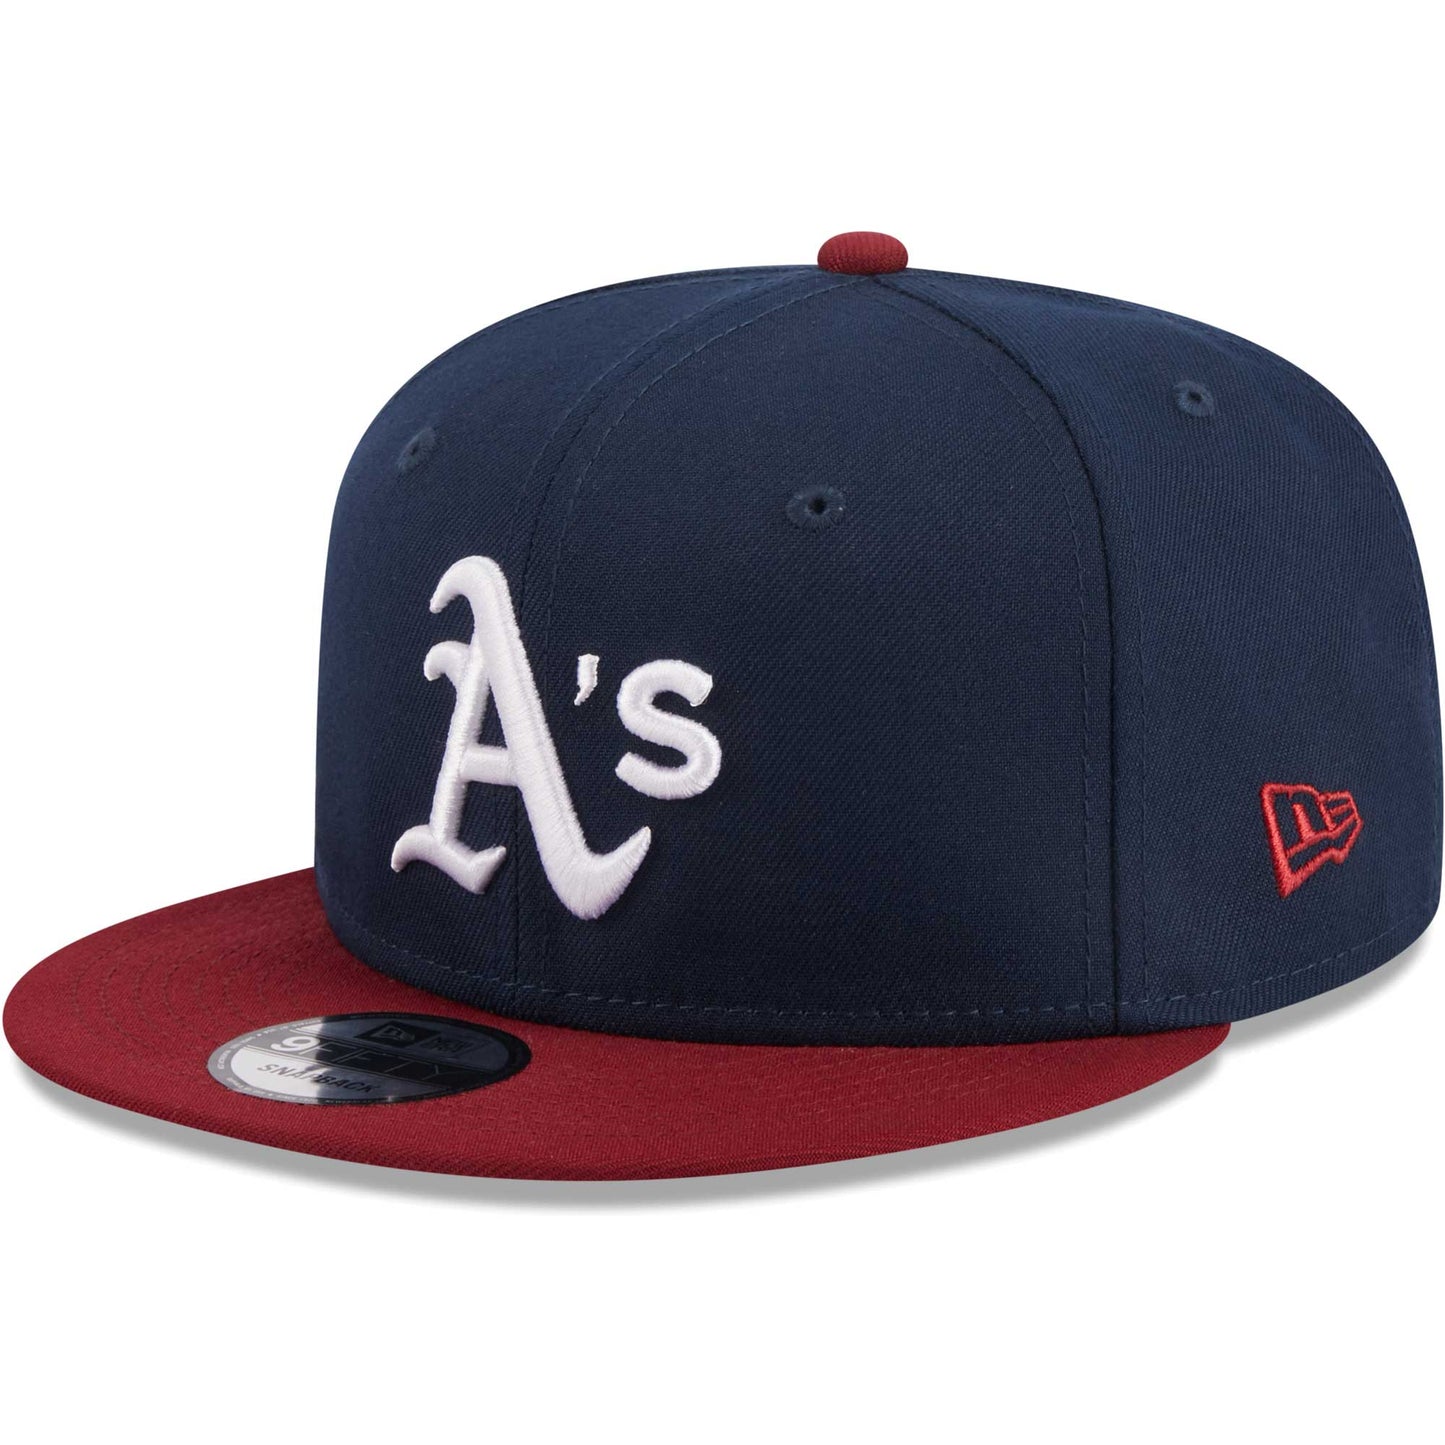 Oakland Athletics New Era Two-Tone Color Pack 9FIFTY Snapback Hat - Navy